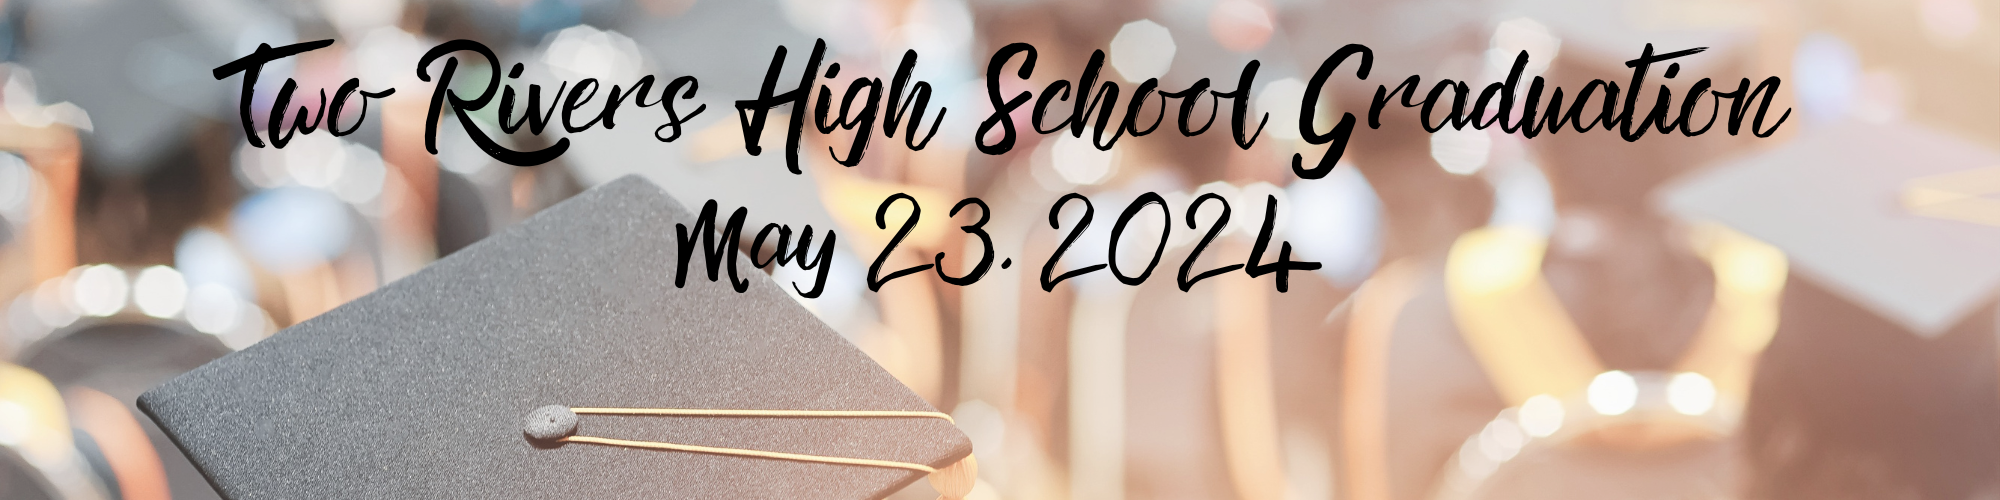 Two Rivers High School Graduation, May 23, 2024